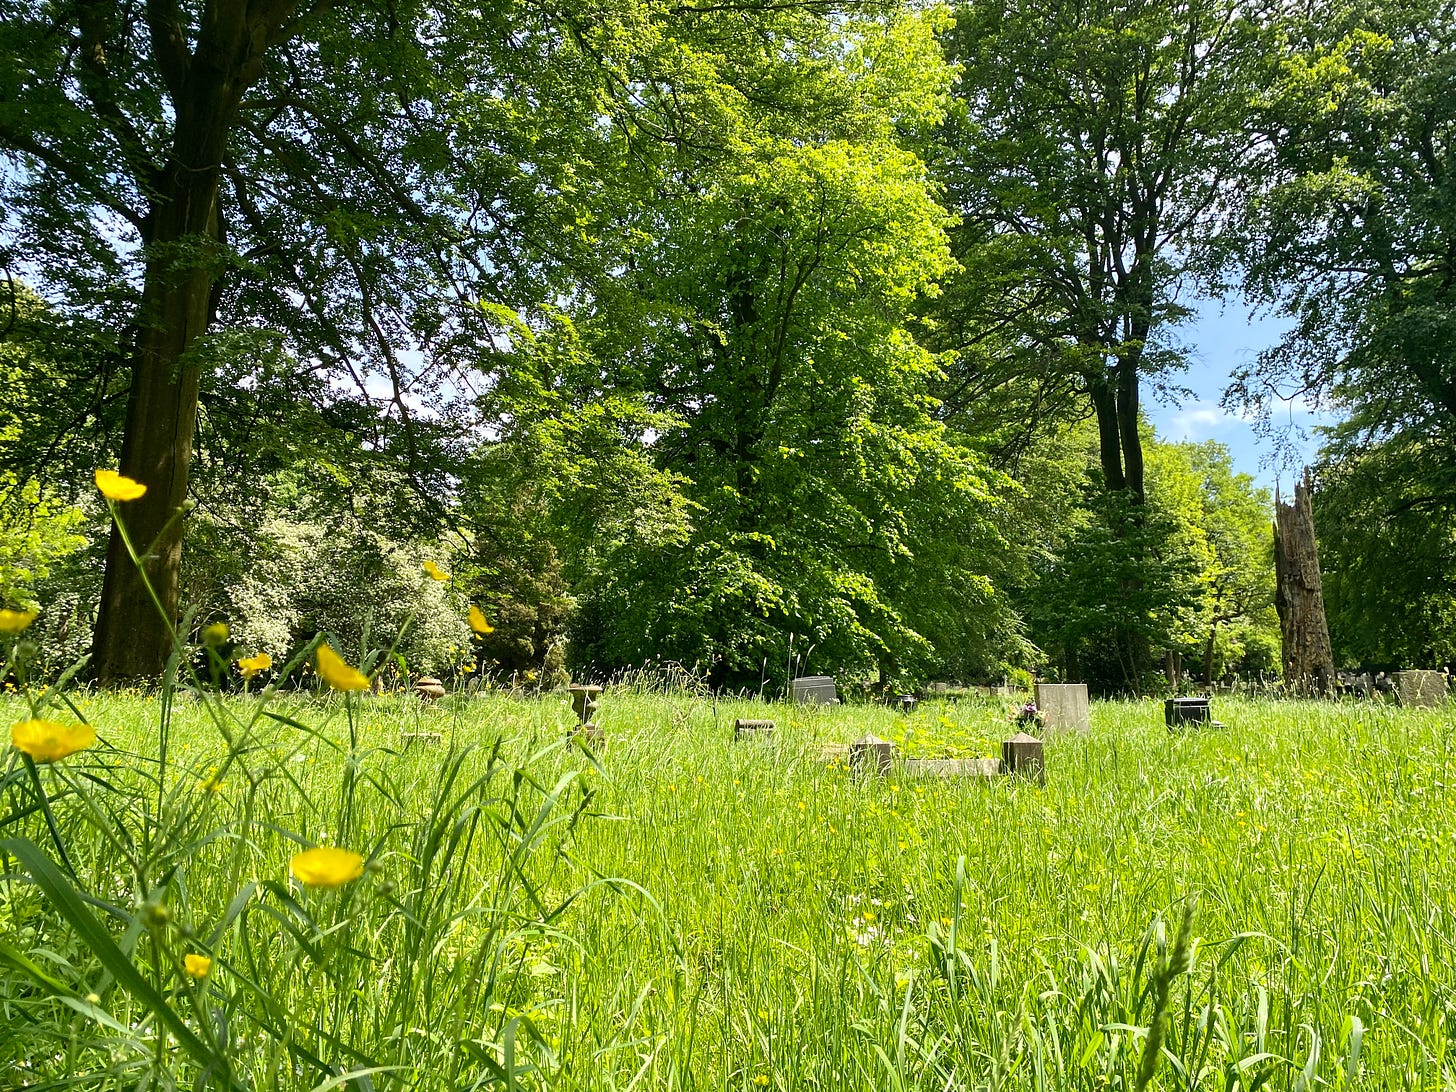 lush green grass and yellow buttercups in Stoke cemetery.